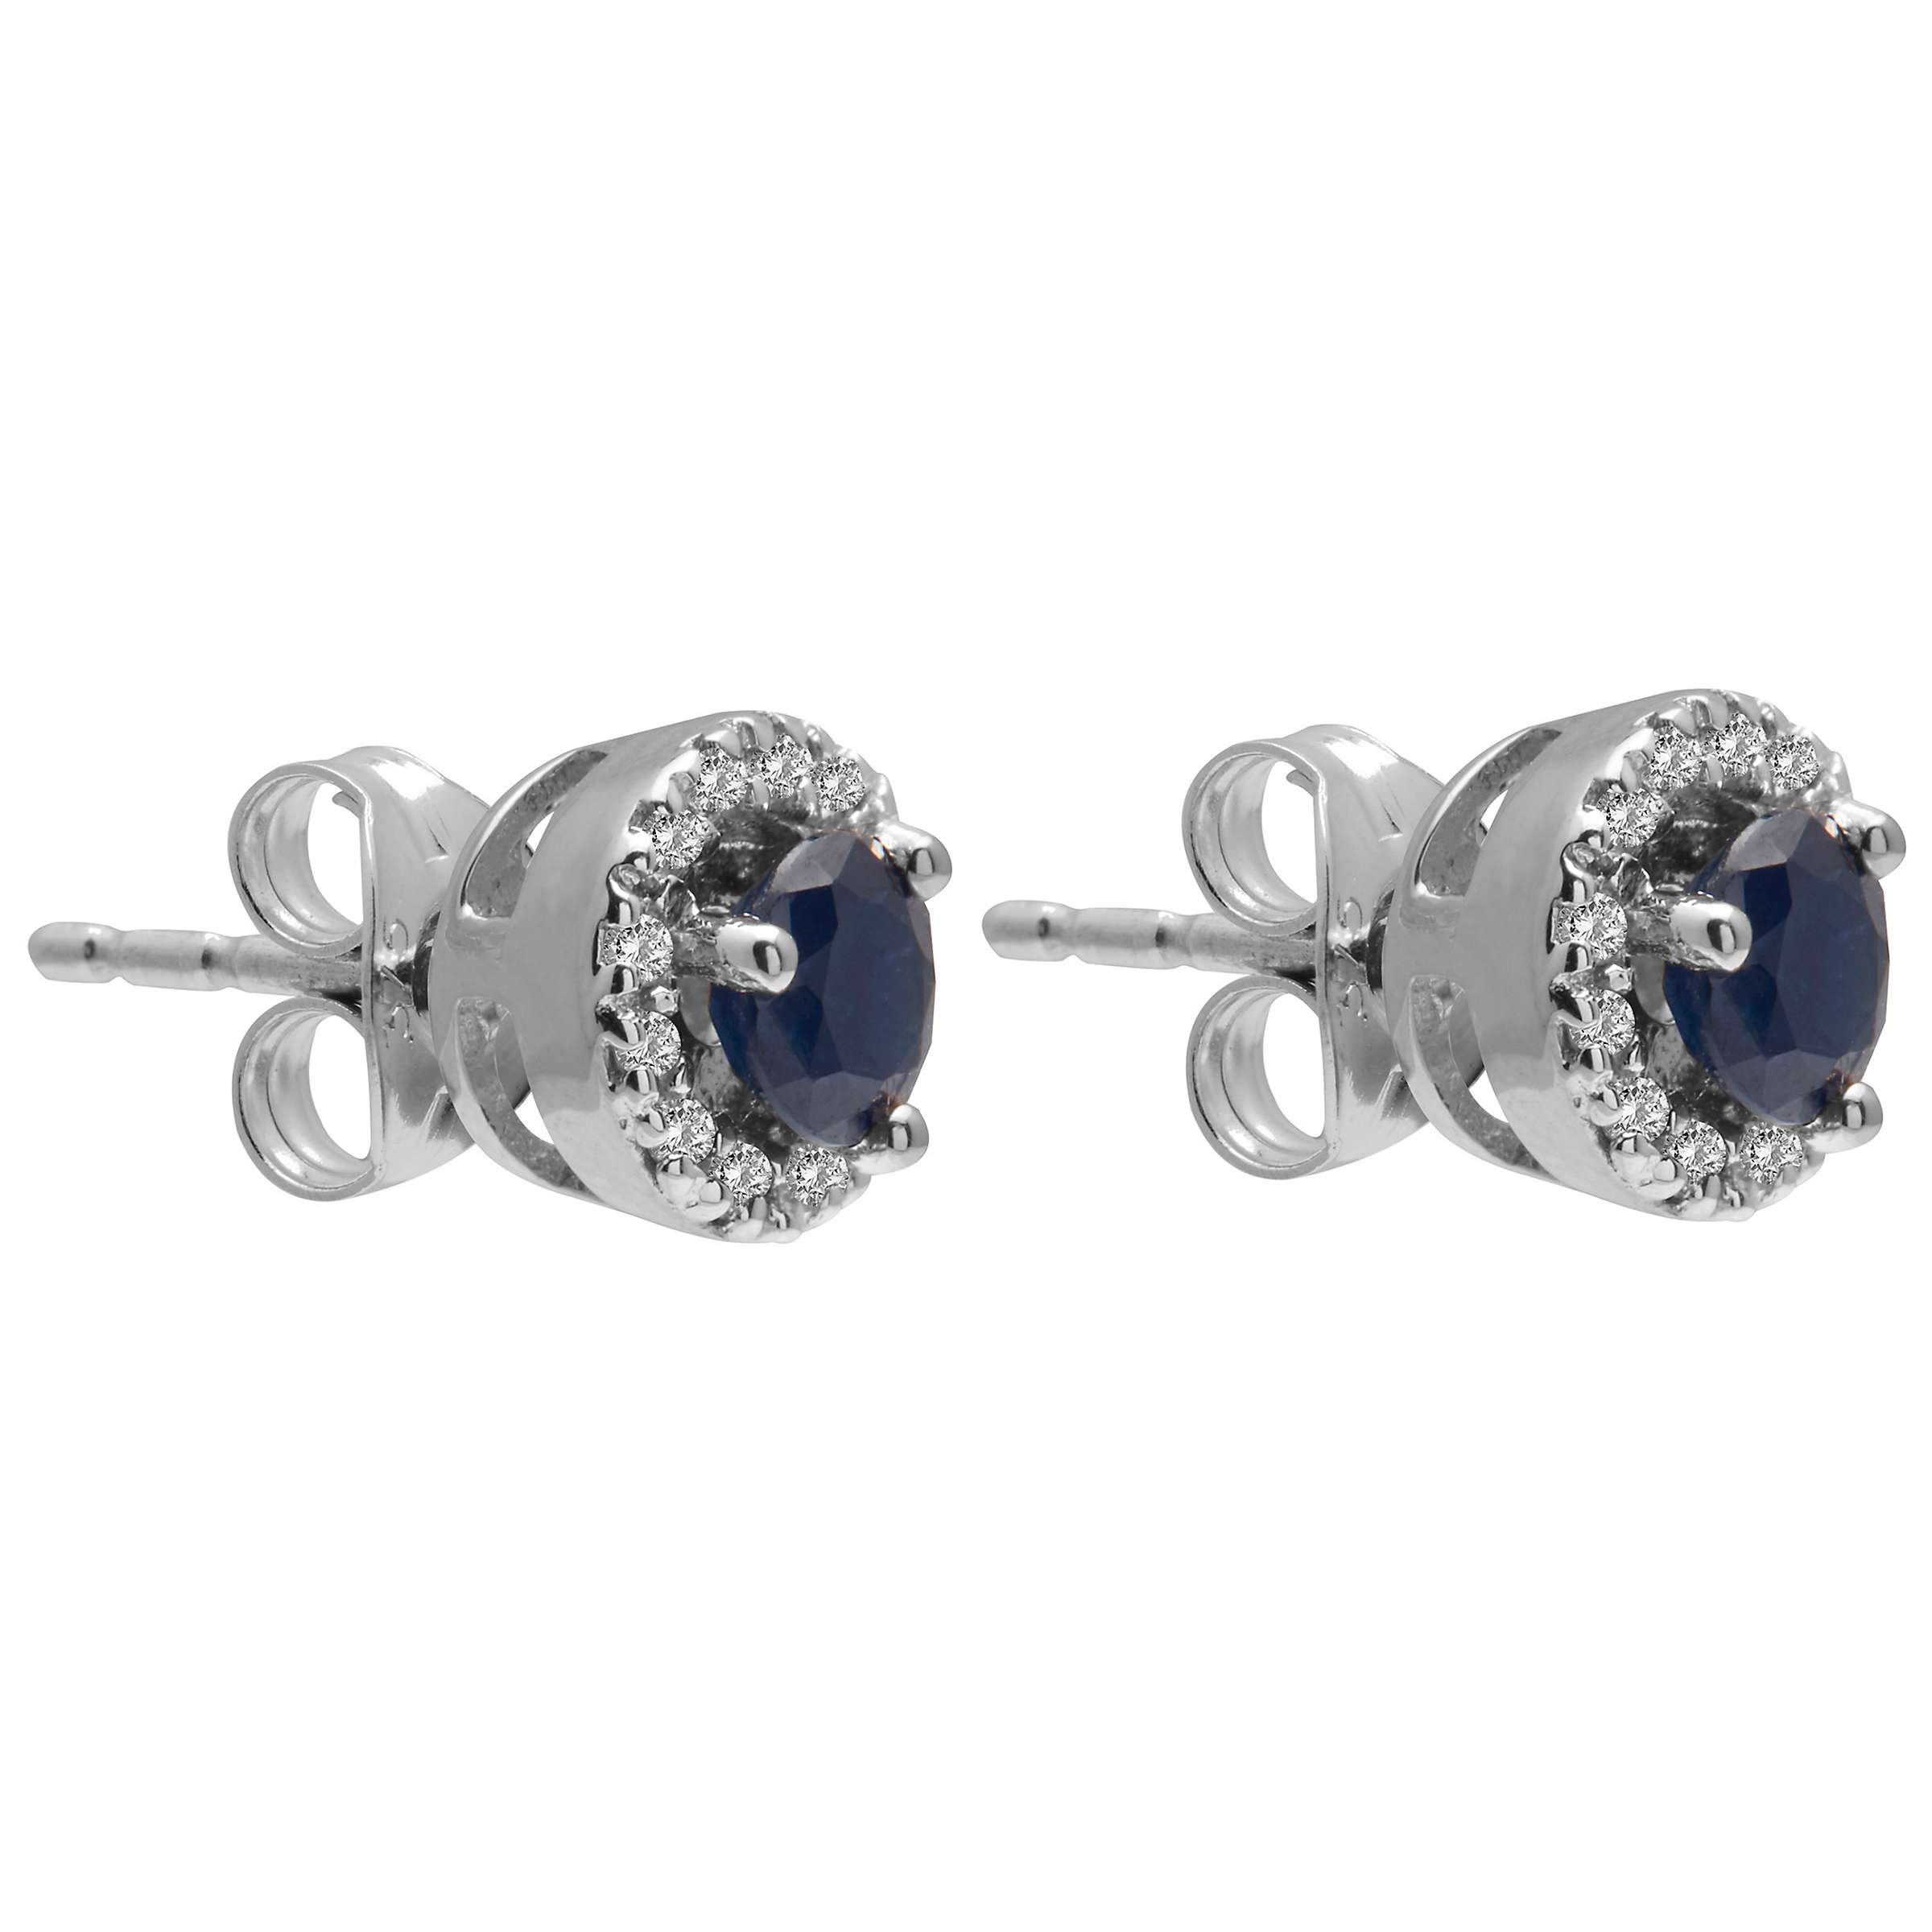 Buy A B Davis 9ct Gold Diamond and Precious Stone Round Stud Earrings Online at johnlewis.com